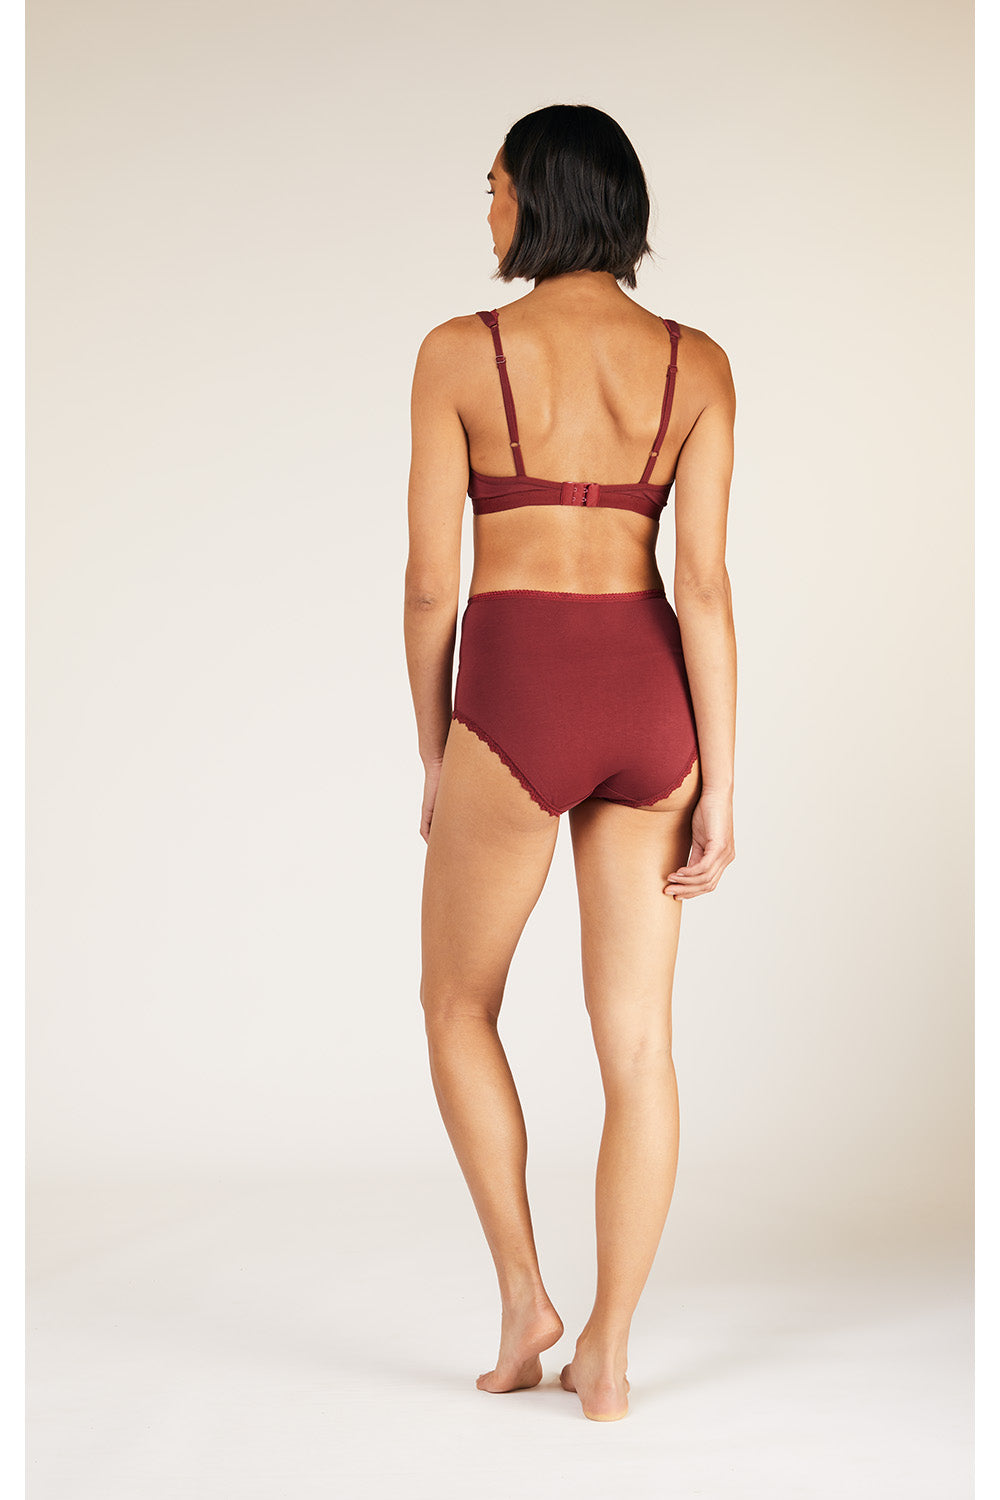 Lingerie Vintage Style high-waisted Brief Underwear in Red Wine 